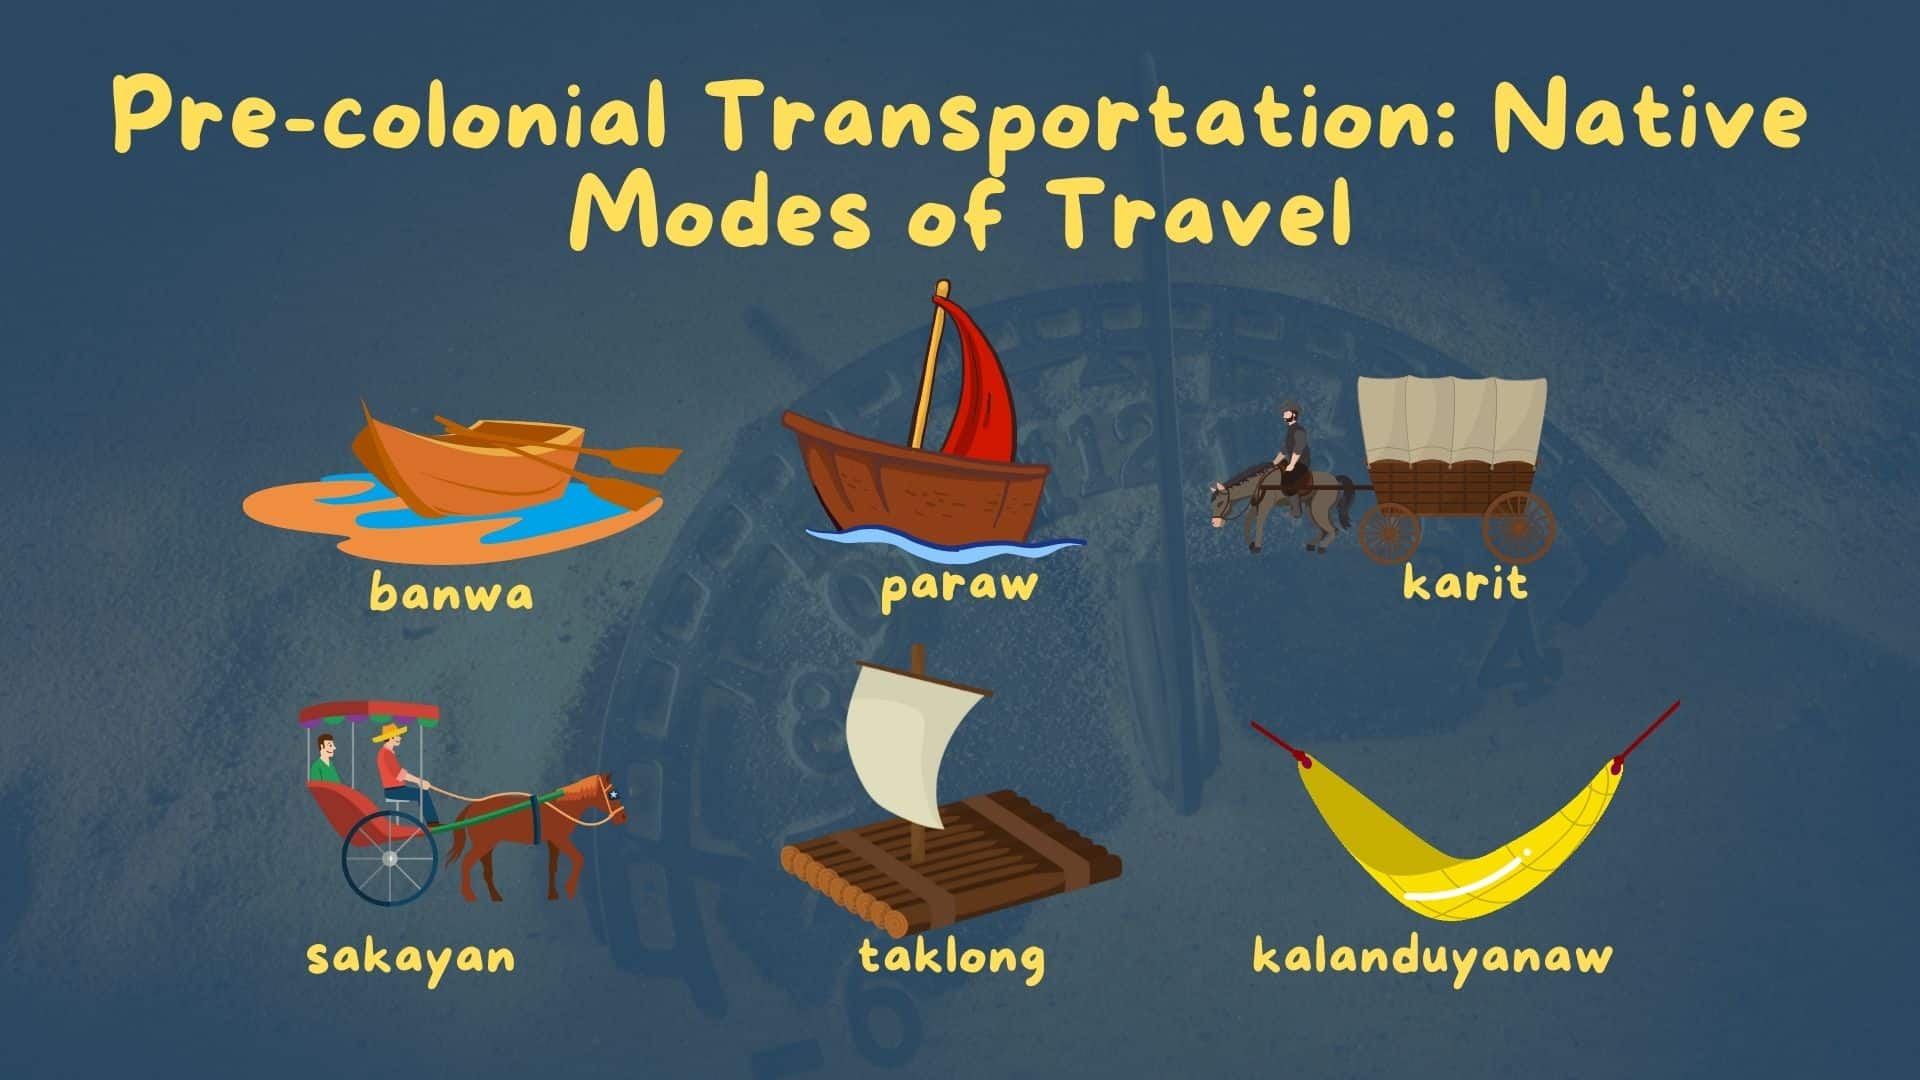 Pre-colonial Transportation: Native Modes of Travel